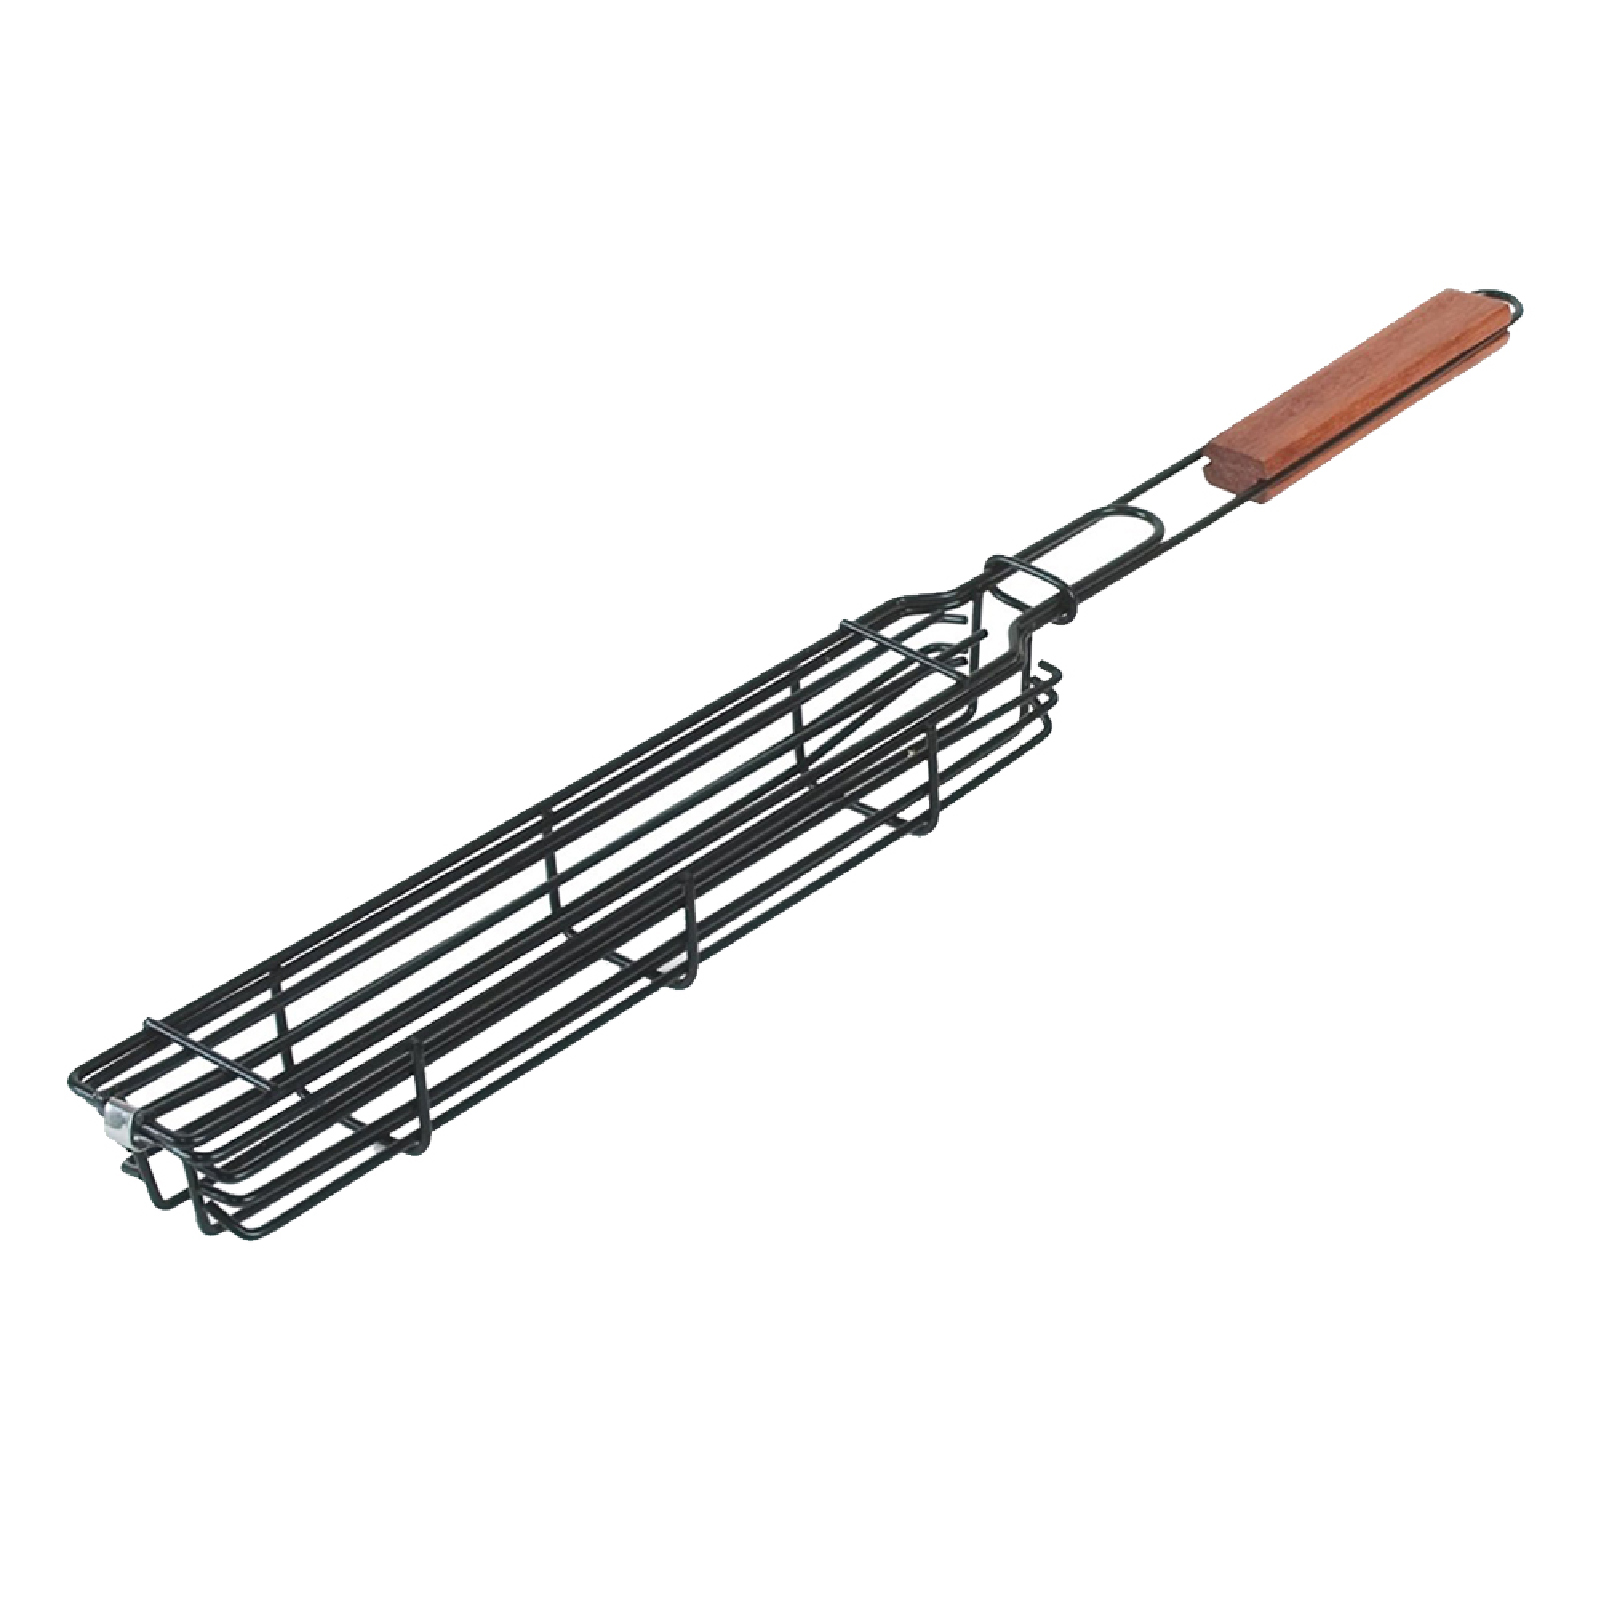 Visland Grilling Baskets ,Companion Nonstick Grilling Baskets for Outdoor Grill - Kabob Grill Baskets,Vegetable Grill Basket for Vegetable,Onion,Fish,Chicken and Meat - image 2 of 8